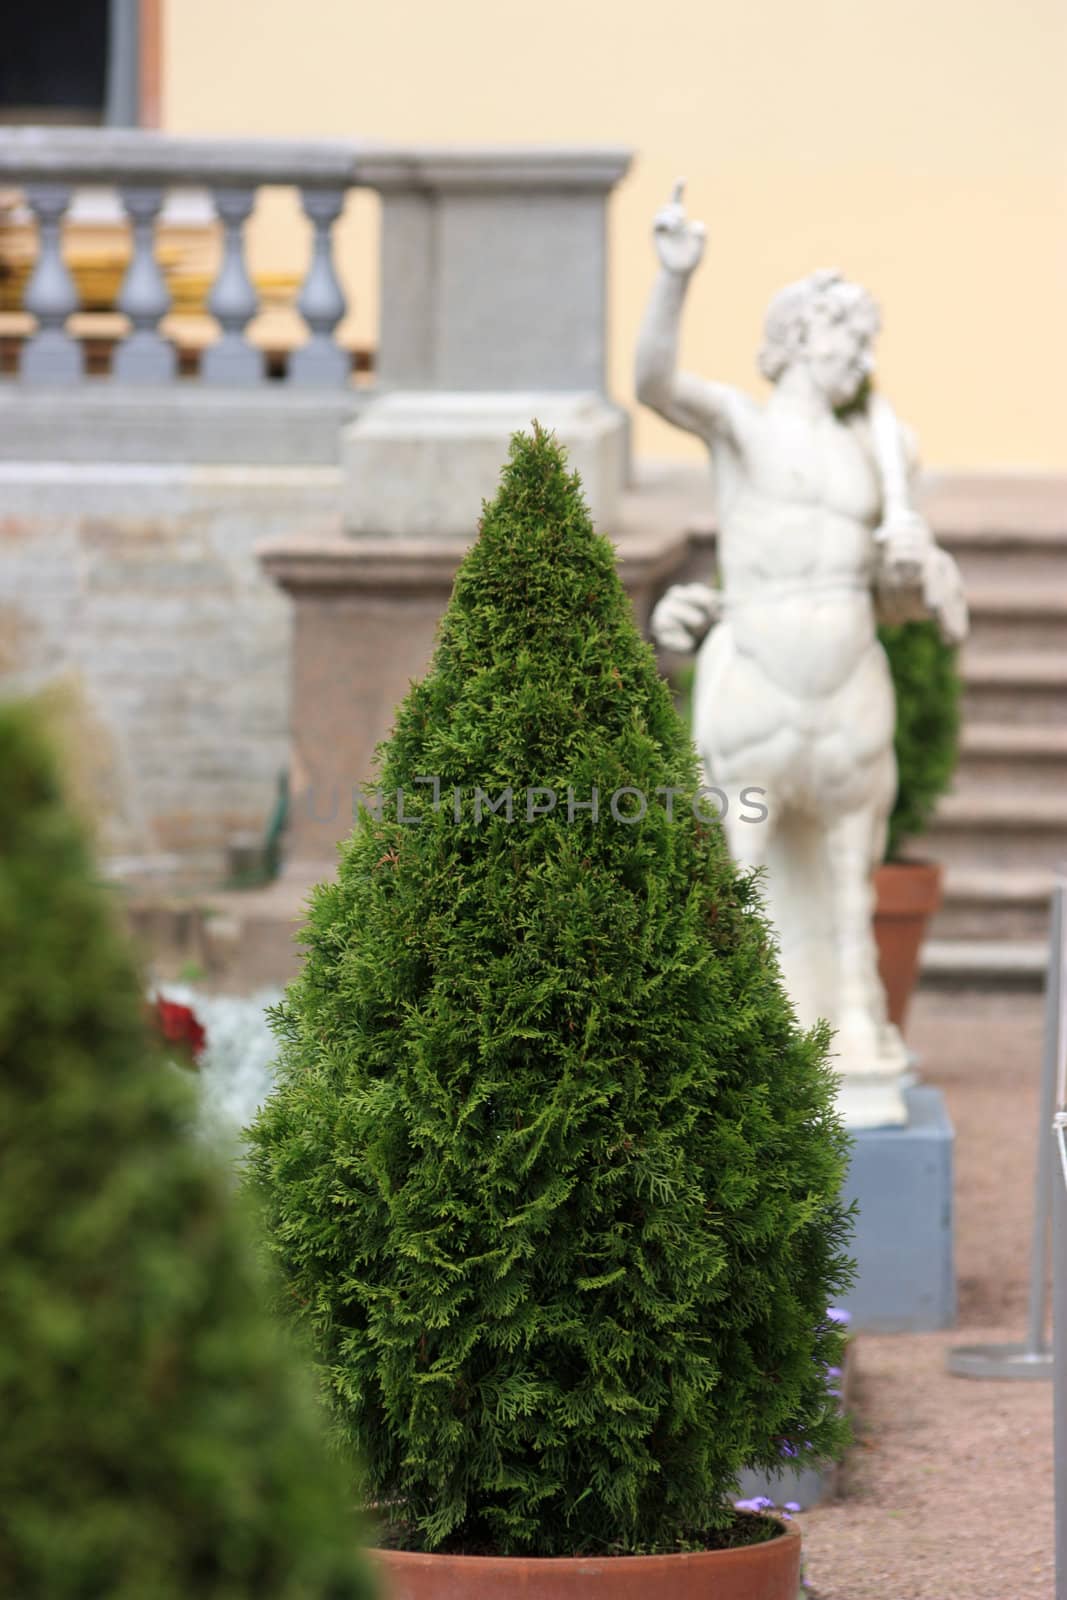 Ornamental tree cone amid statues and banisters.